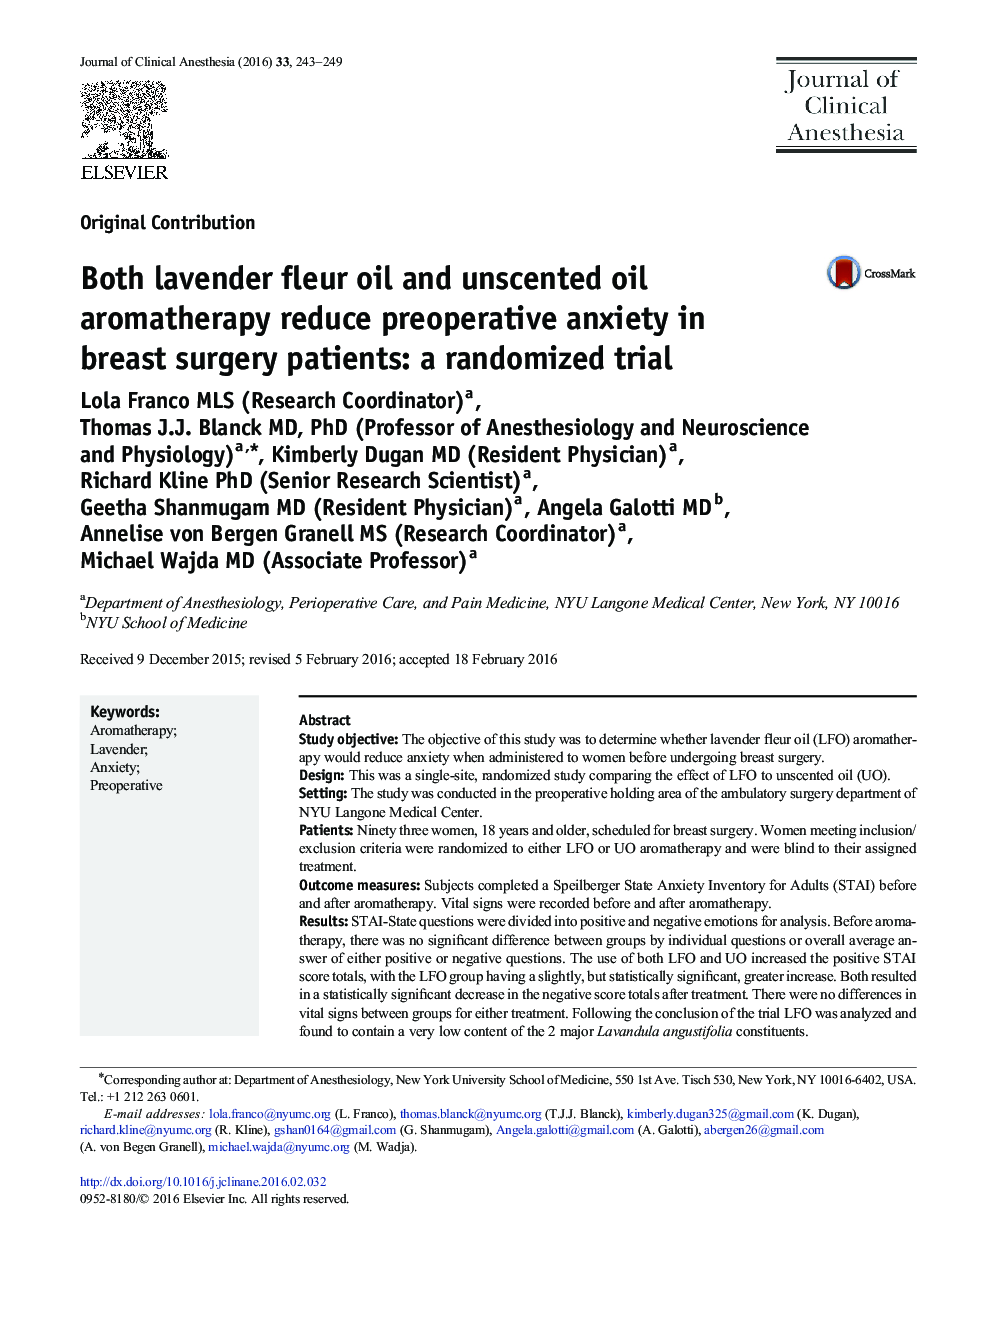 Both lavender fleur oil and unscented oil aromatherapy reduce preoperative anxiety in breast surgery patients: a randomized trial 